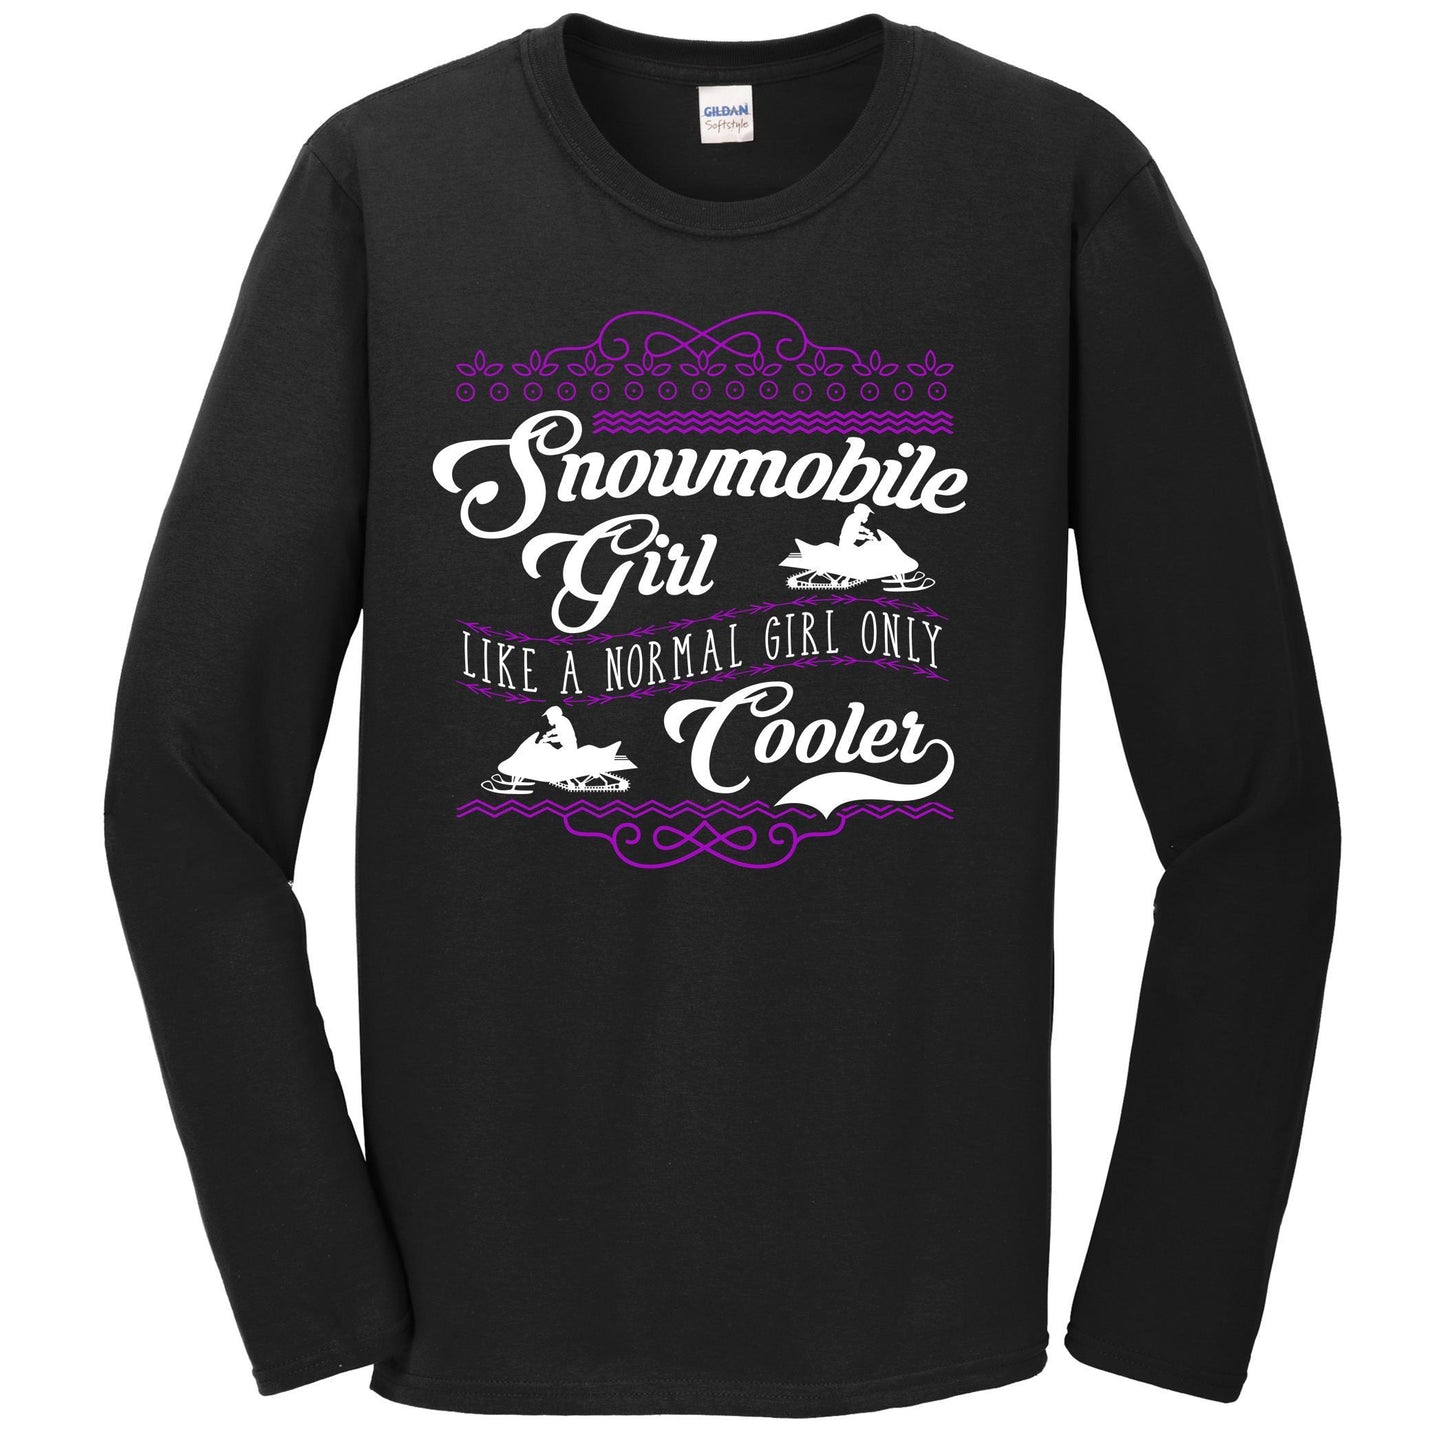 Snowmobile Girl Like A Normal Girl Only Cooler Funny Long Sleeve T-Shirt